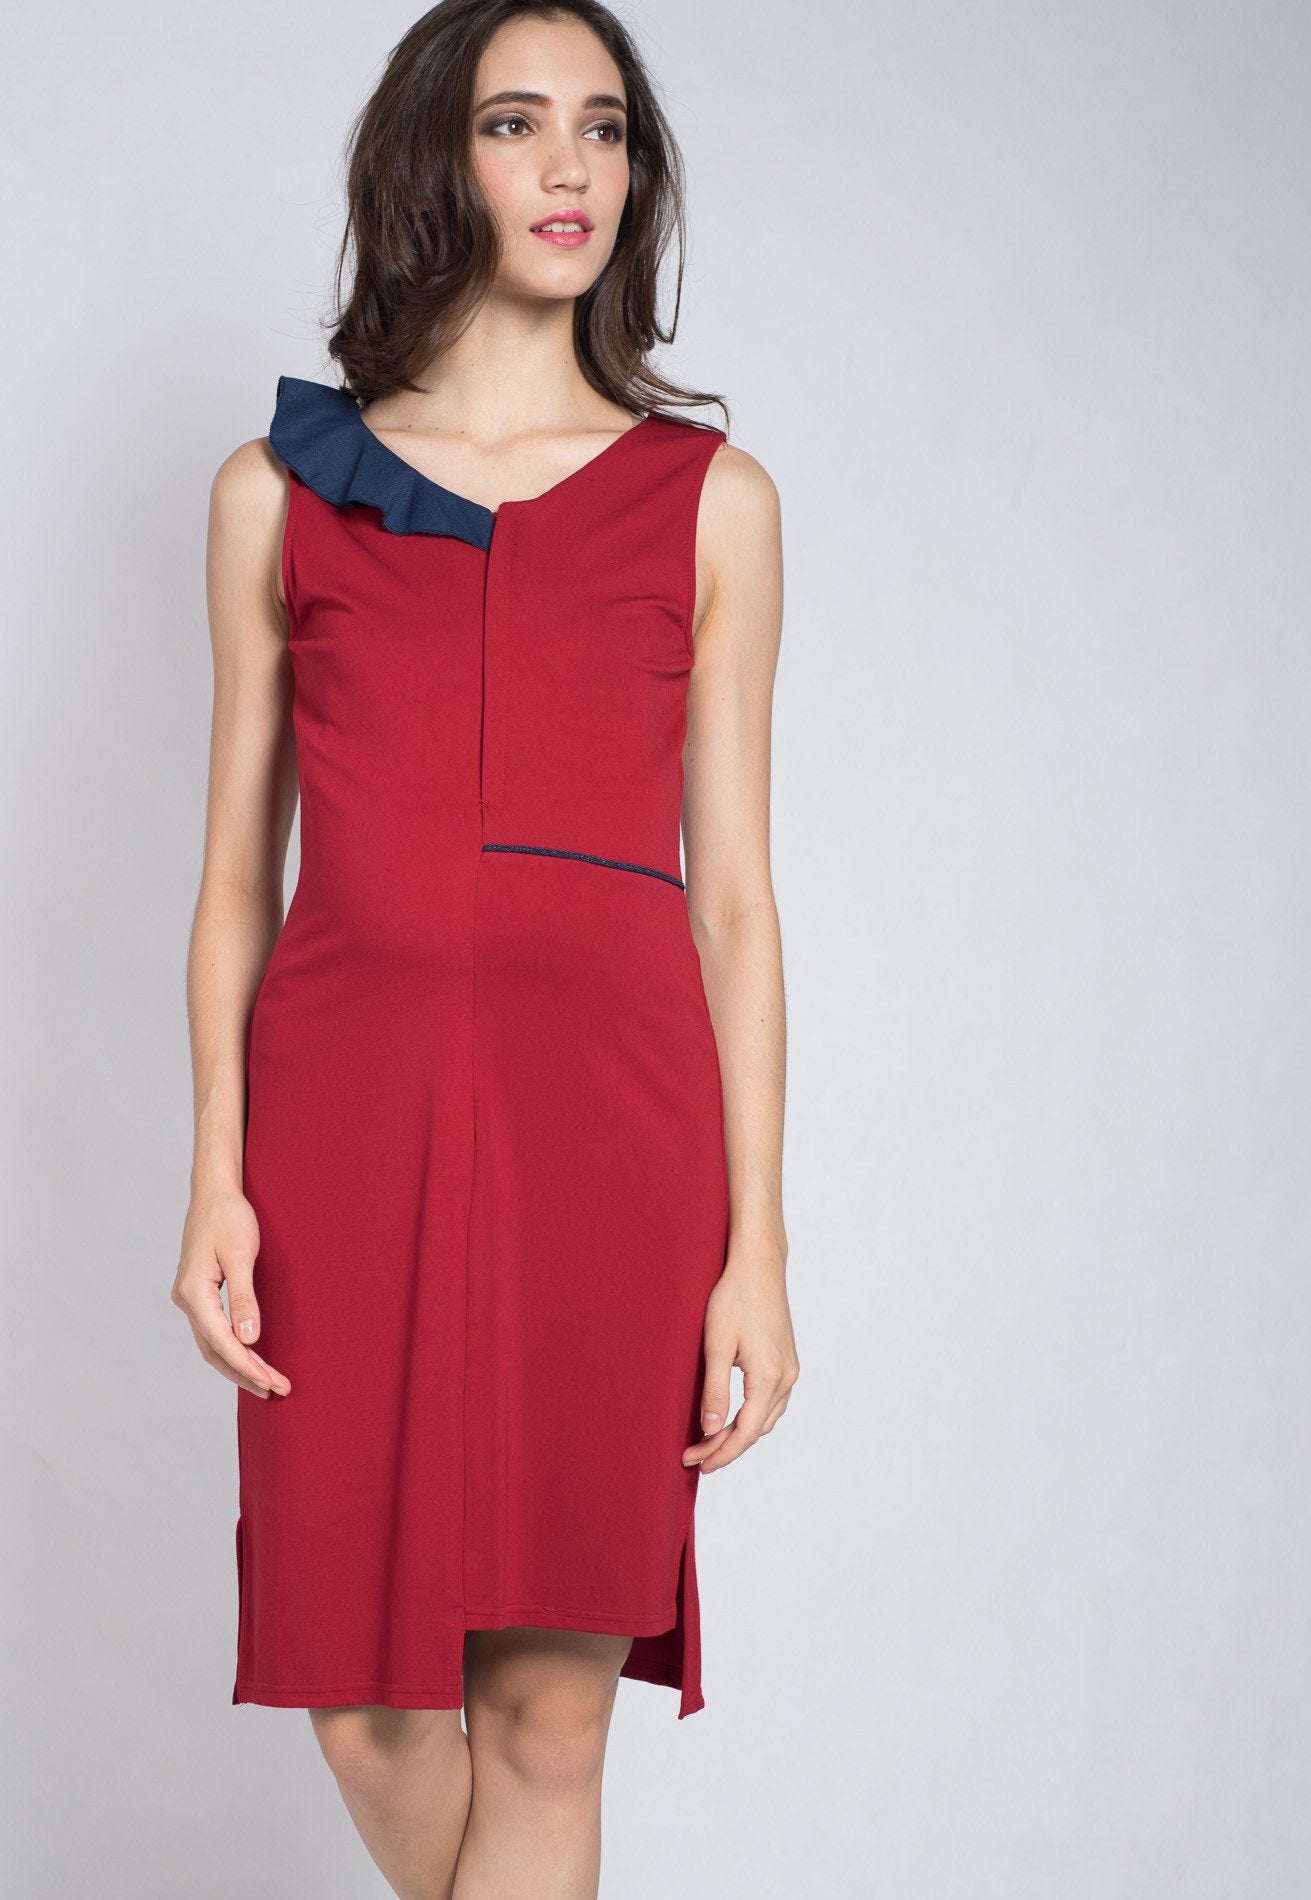 SALE Red Aerial Frills Nursing Dress  by Jump Eat Cry - Maternity and nursing wear